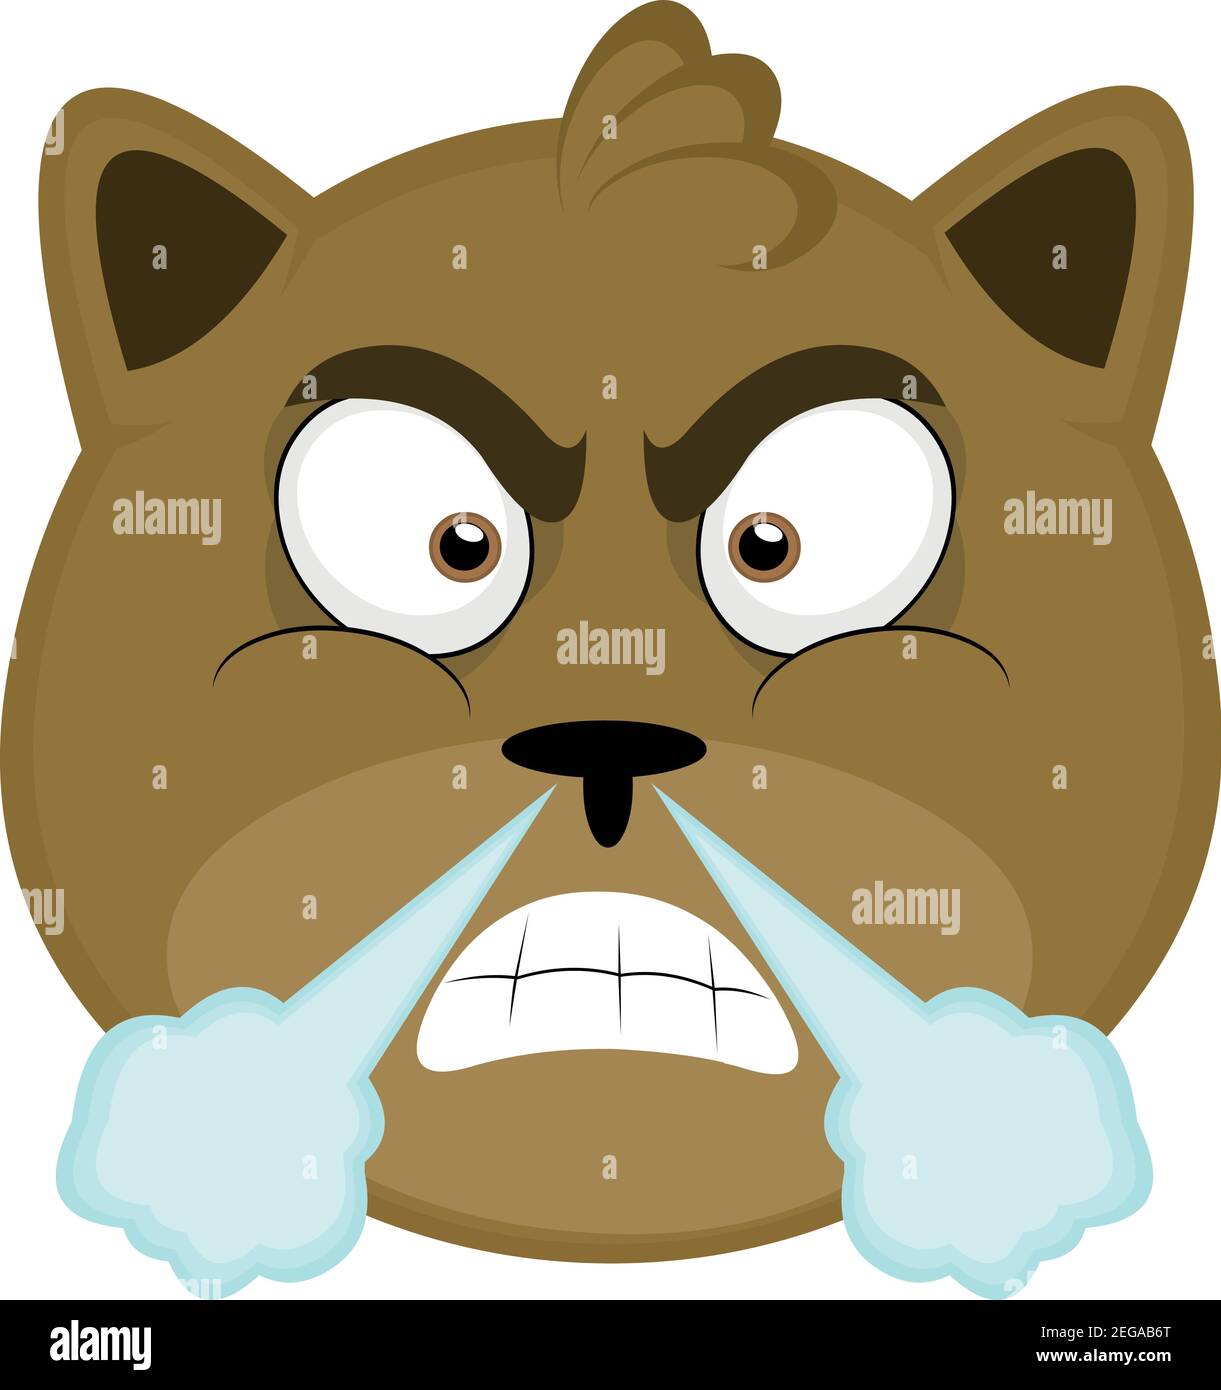 Vector emoticon illustration of a cartoon cat's head with an angry expression fuming from its nose Stock Vector